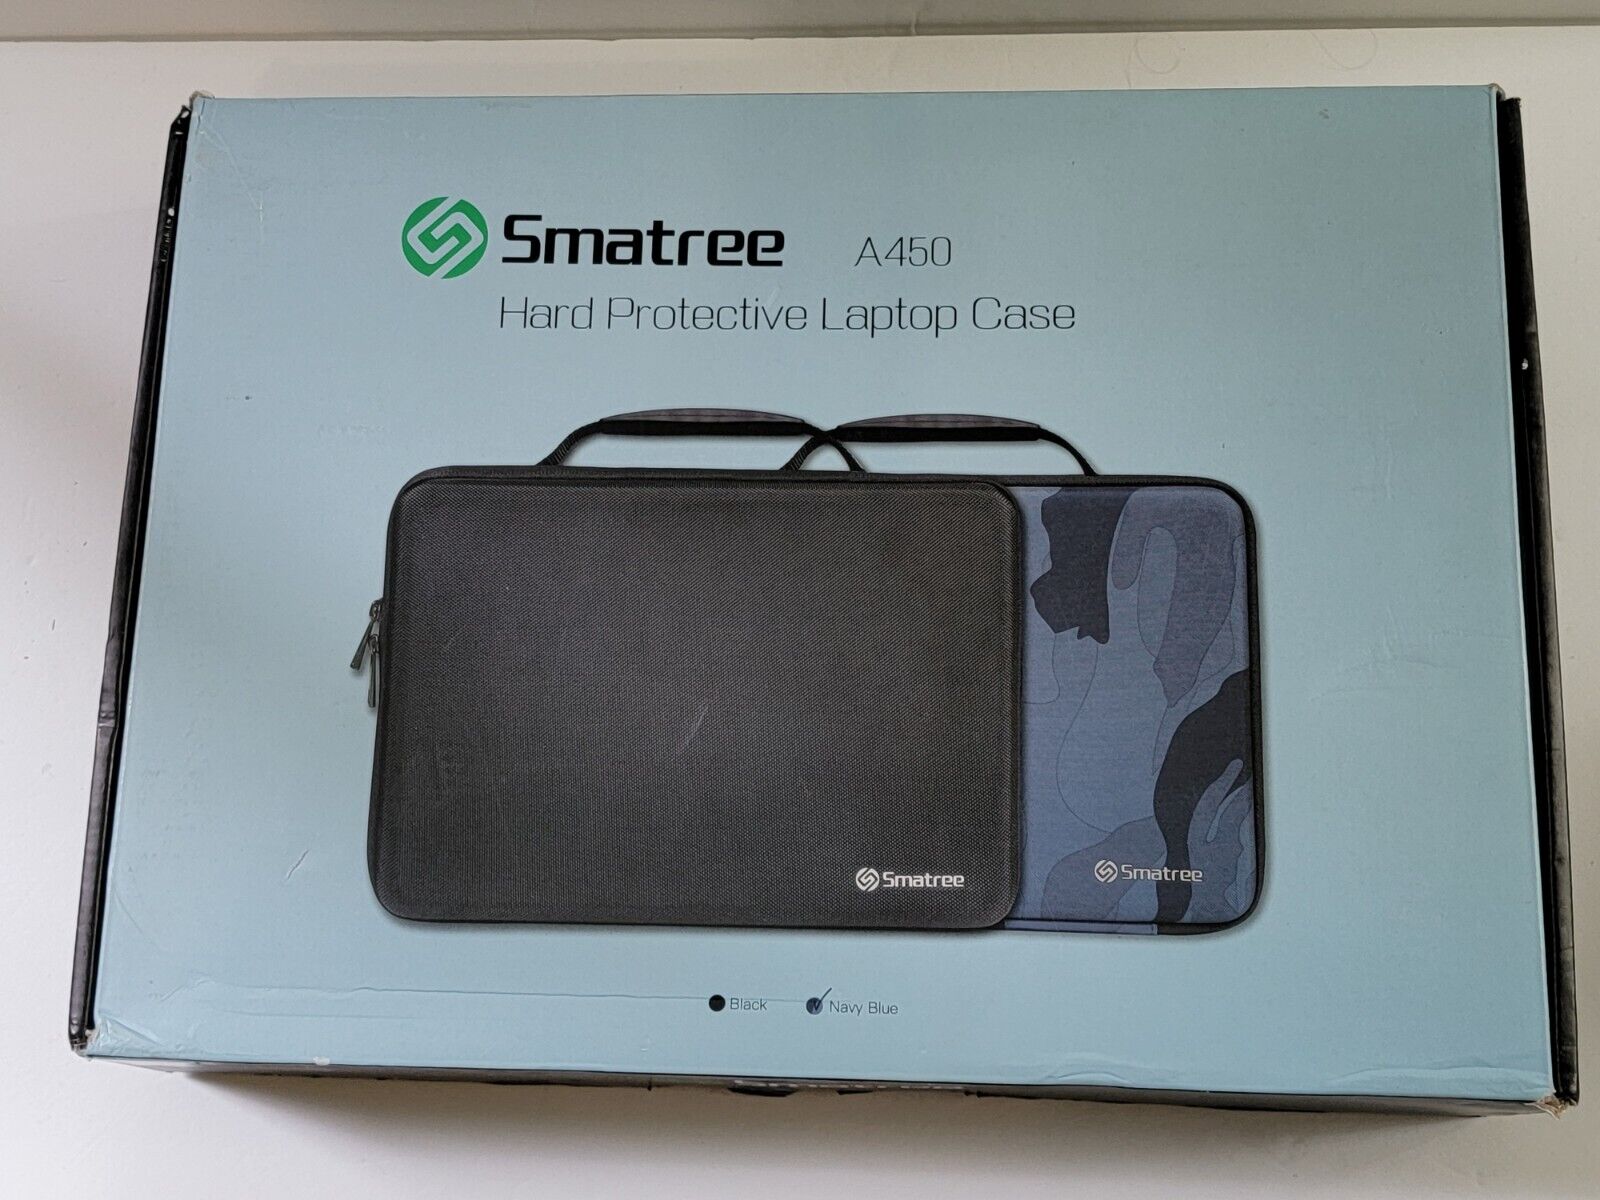 Smartree A450 Hard Protective Laptop Case Blue Cammo W/strap